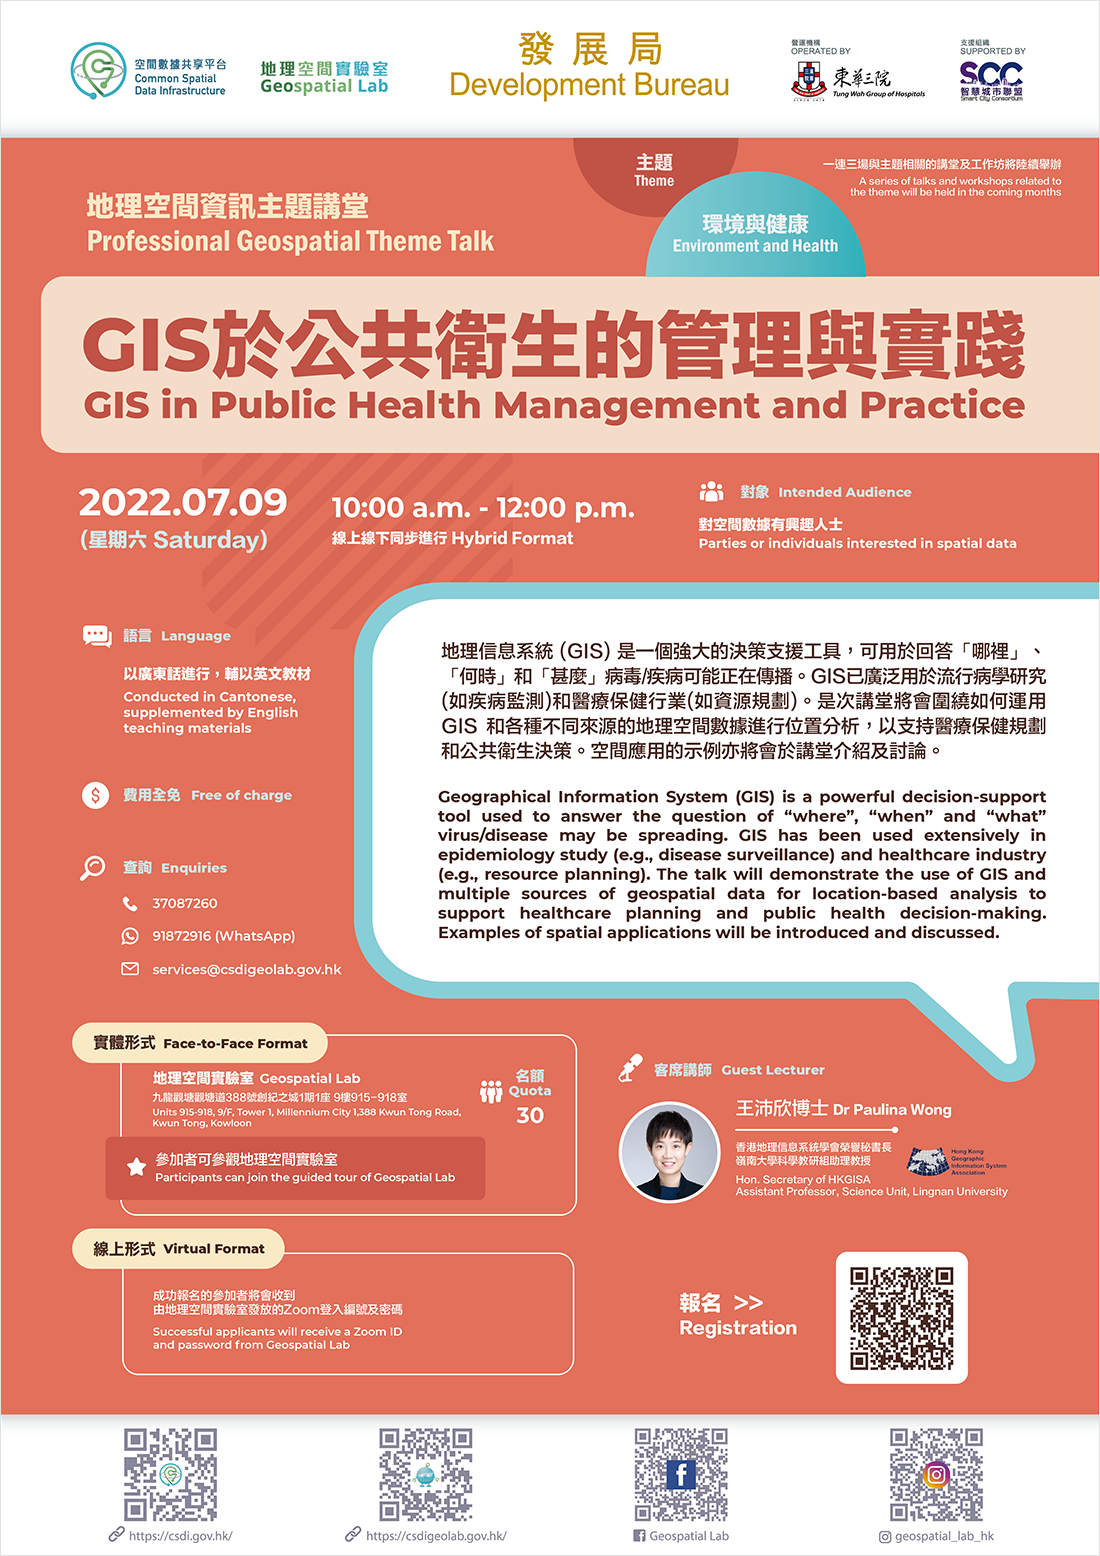 Poster of Professional Geospatial Theme Talk - GIS in Public Health Management and Practice